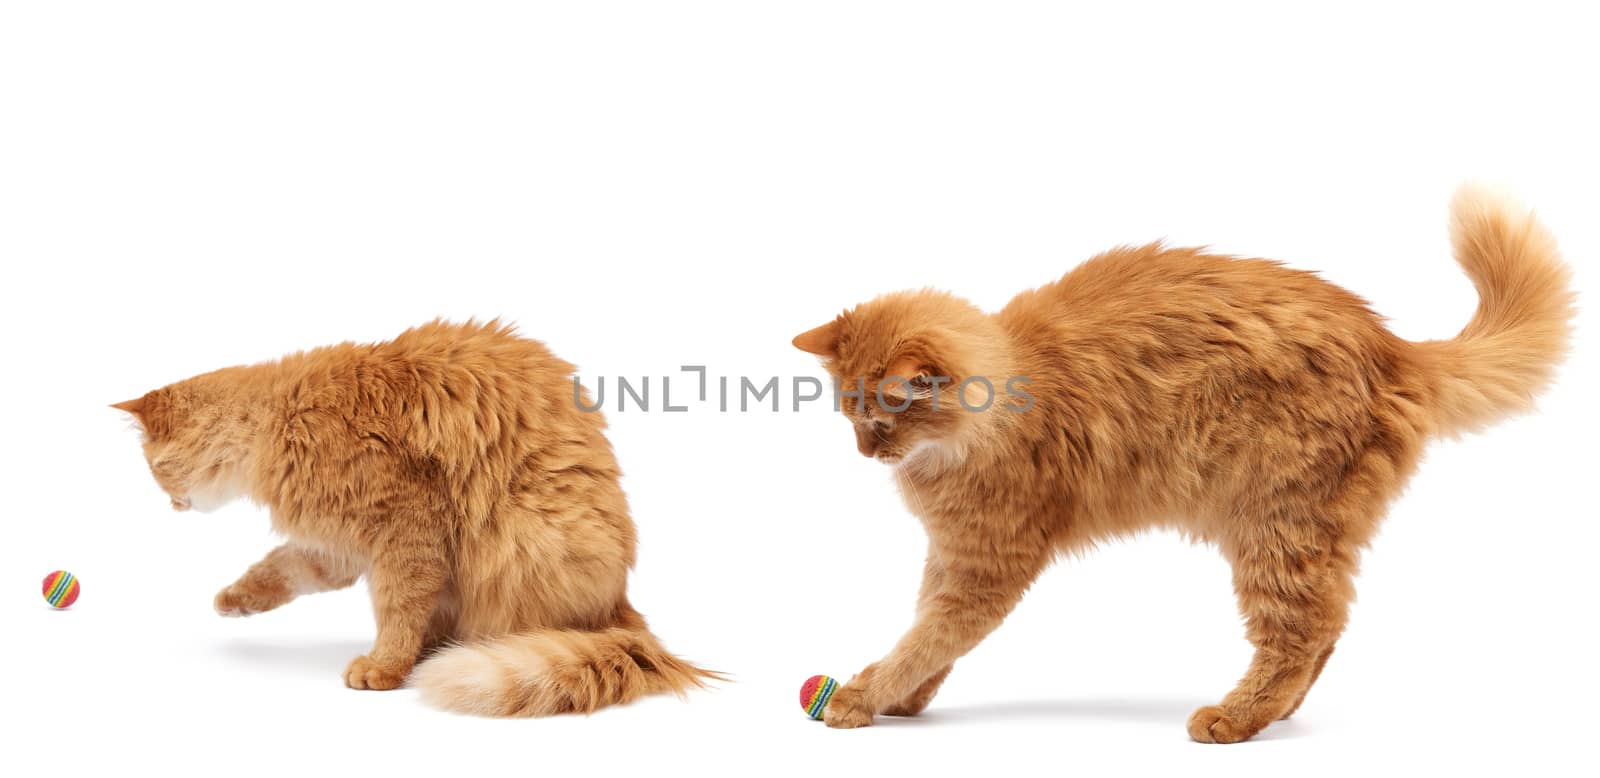 adult fluffy red cat plays with a red ball on a white background by ndanko